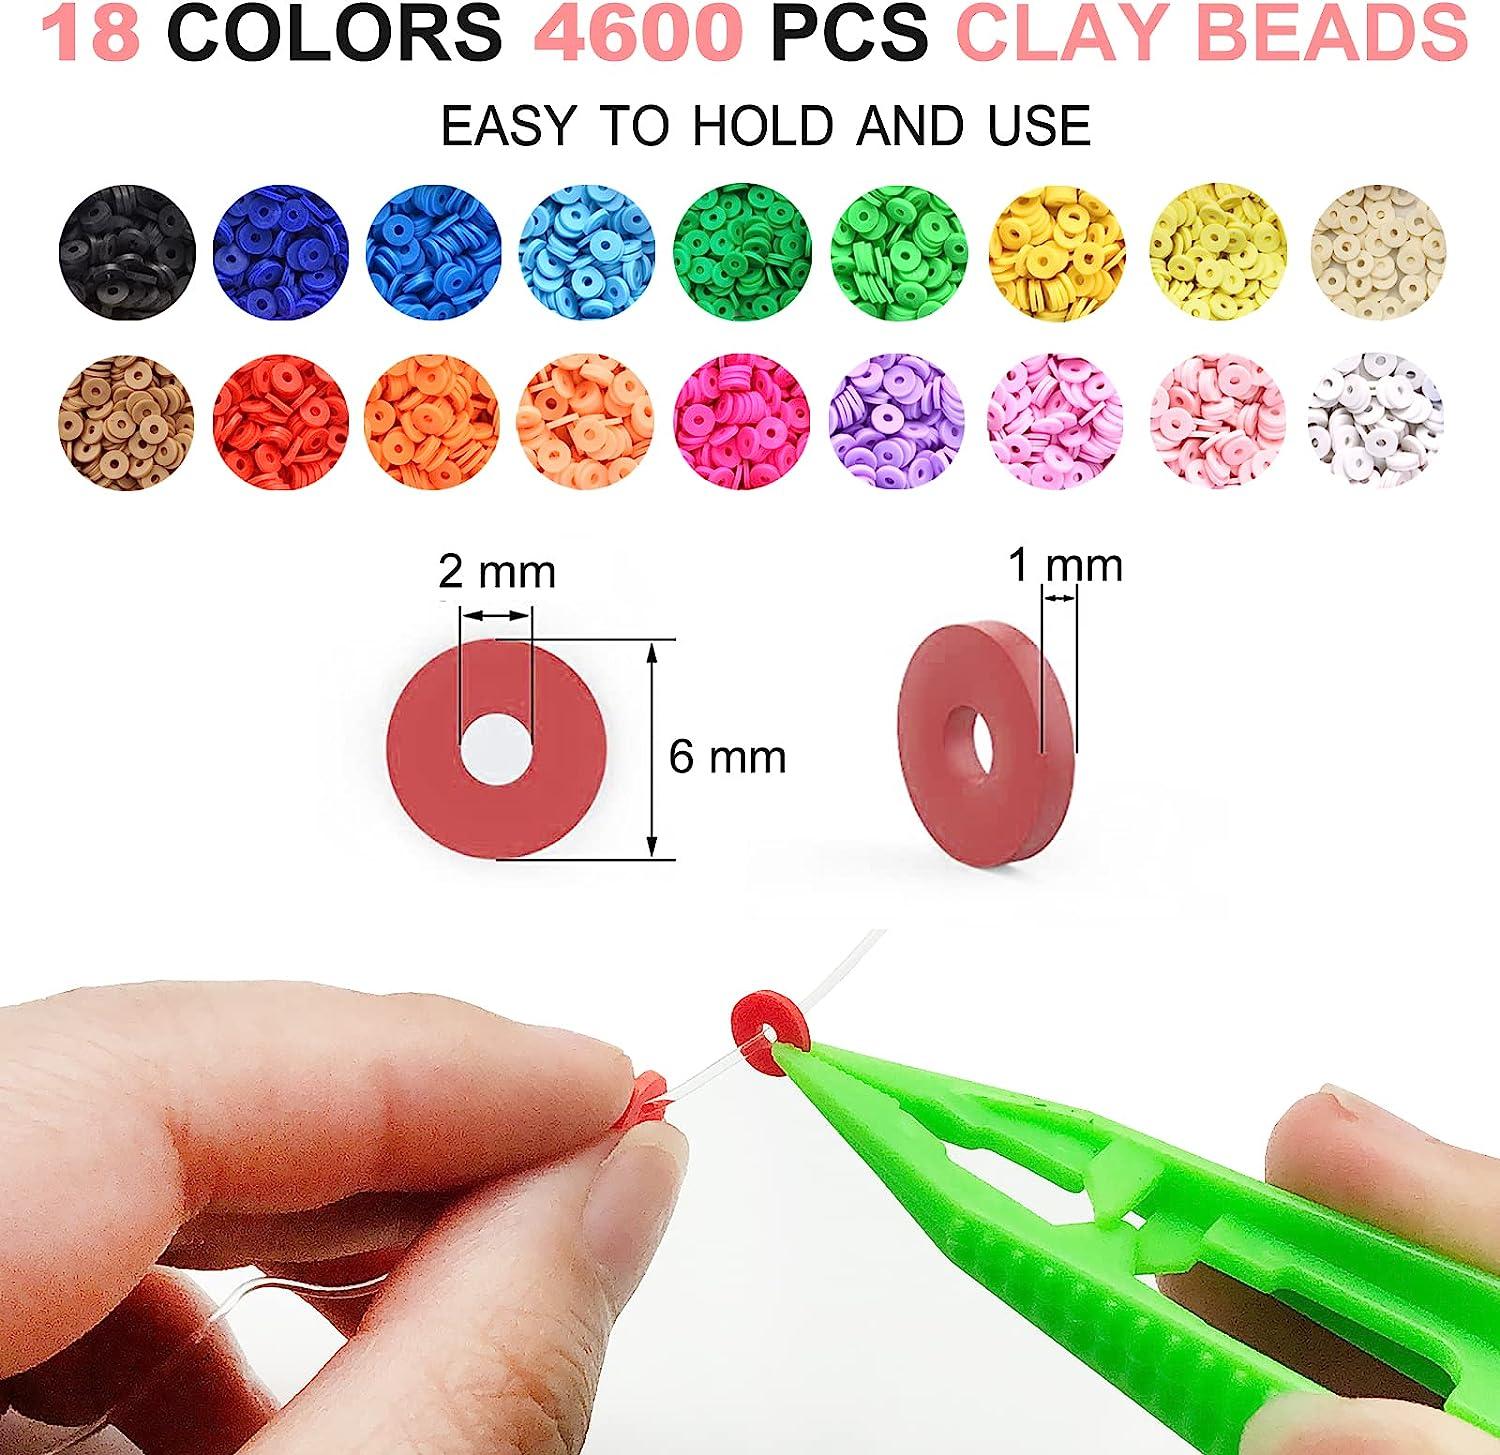 4600 PCS Clay Beads Flat Bead for Jewelry Making Bracelets